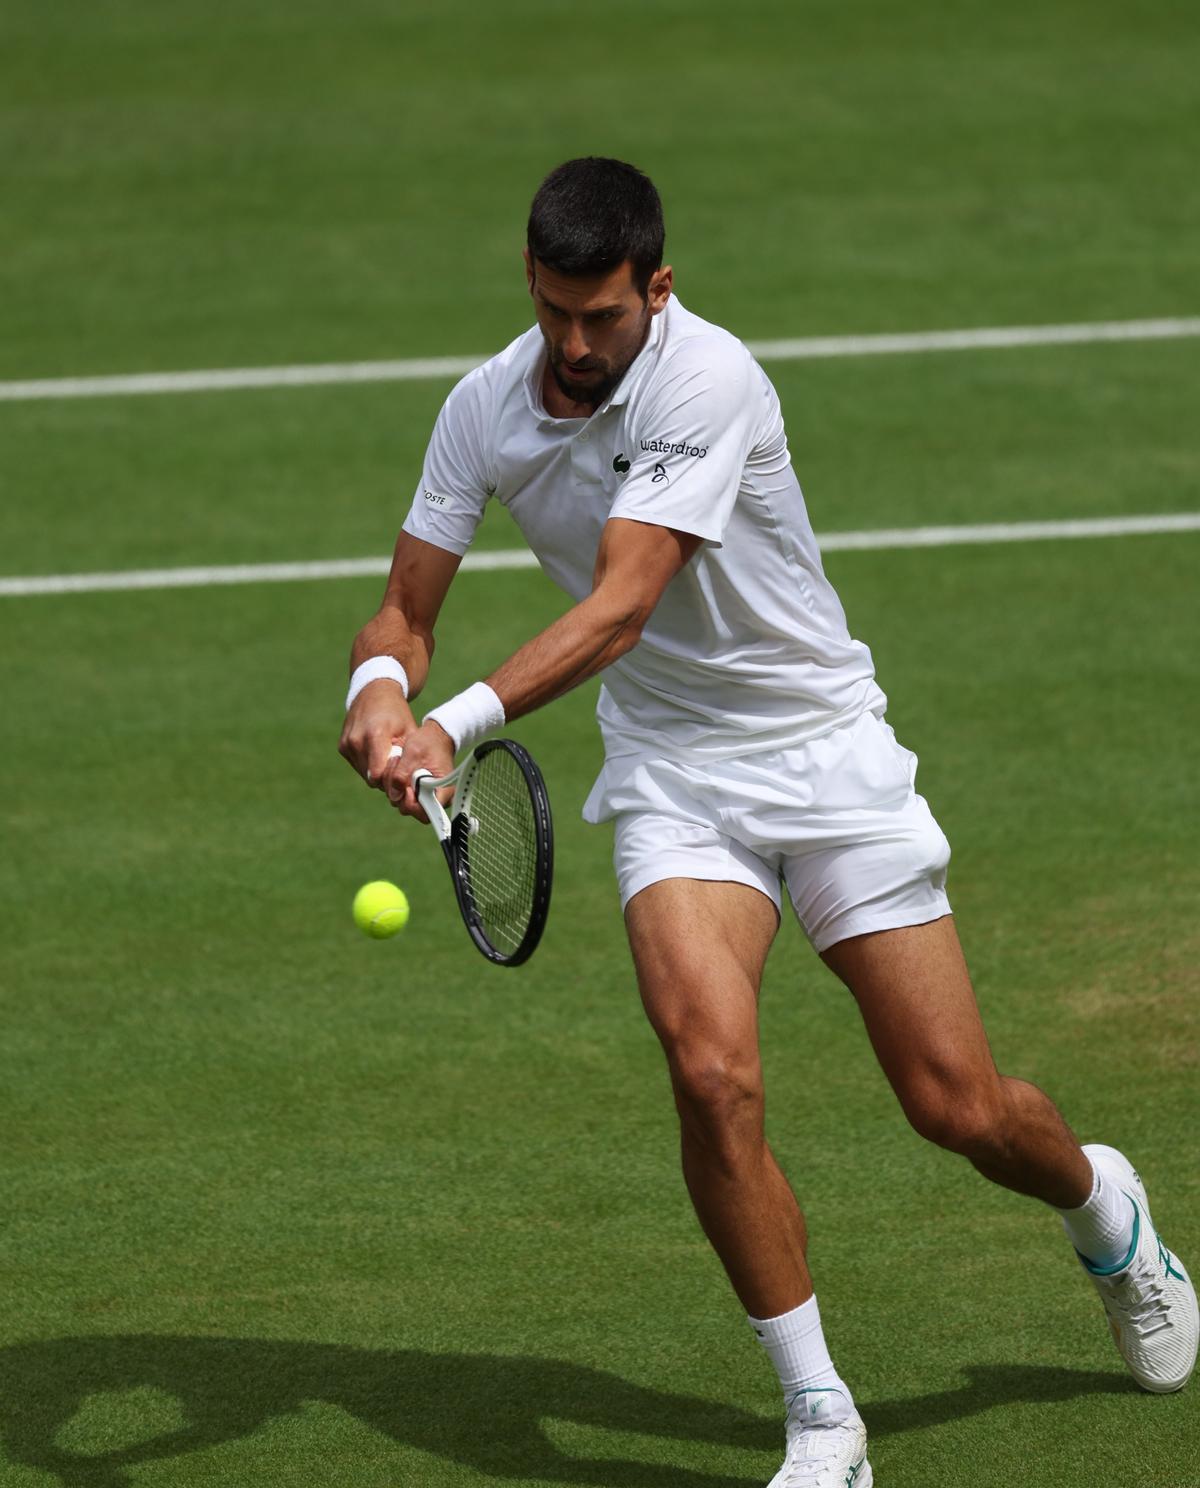 Wimbledon (United Kingdom), 16/07/2023.- Novak Djokovic of Serbia in action during the Men’s Singles final match against Carlos Alcaraz of Spain at the Wimbledon Championships, Wimbledon, Britain, 16 July 2023. (Tenis, España, Reino Unido) EFE/EPA/ISABEL INFANTES EDITORIAL USE ONLY